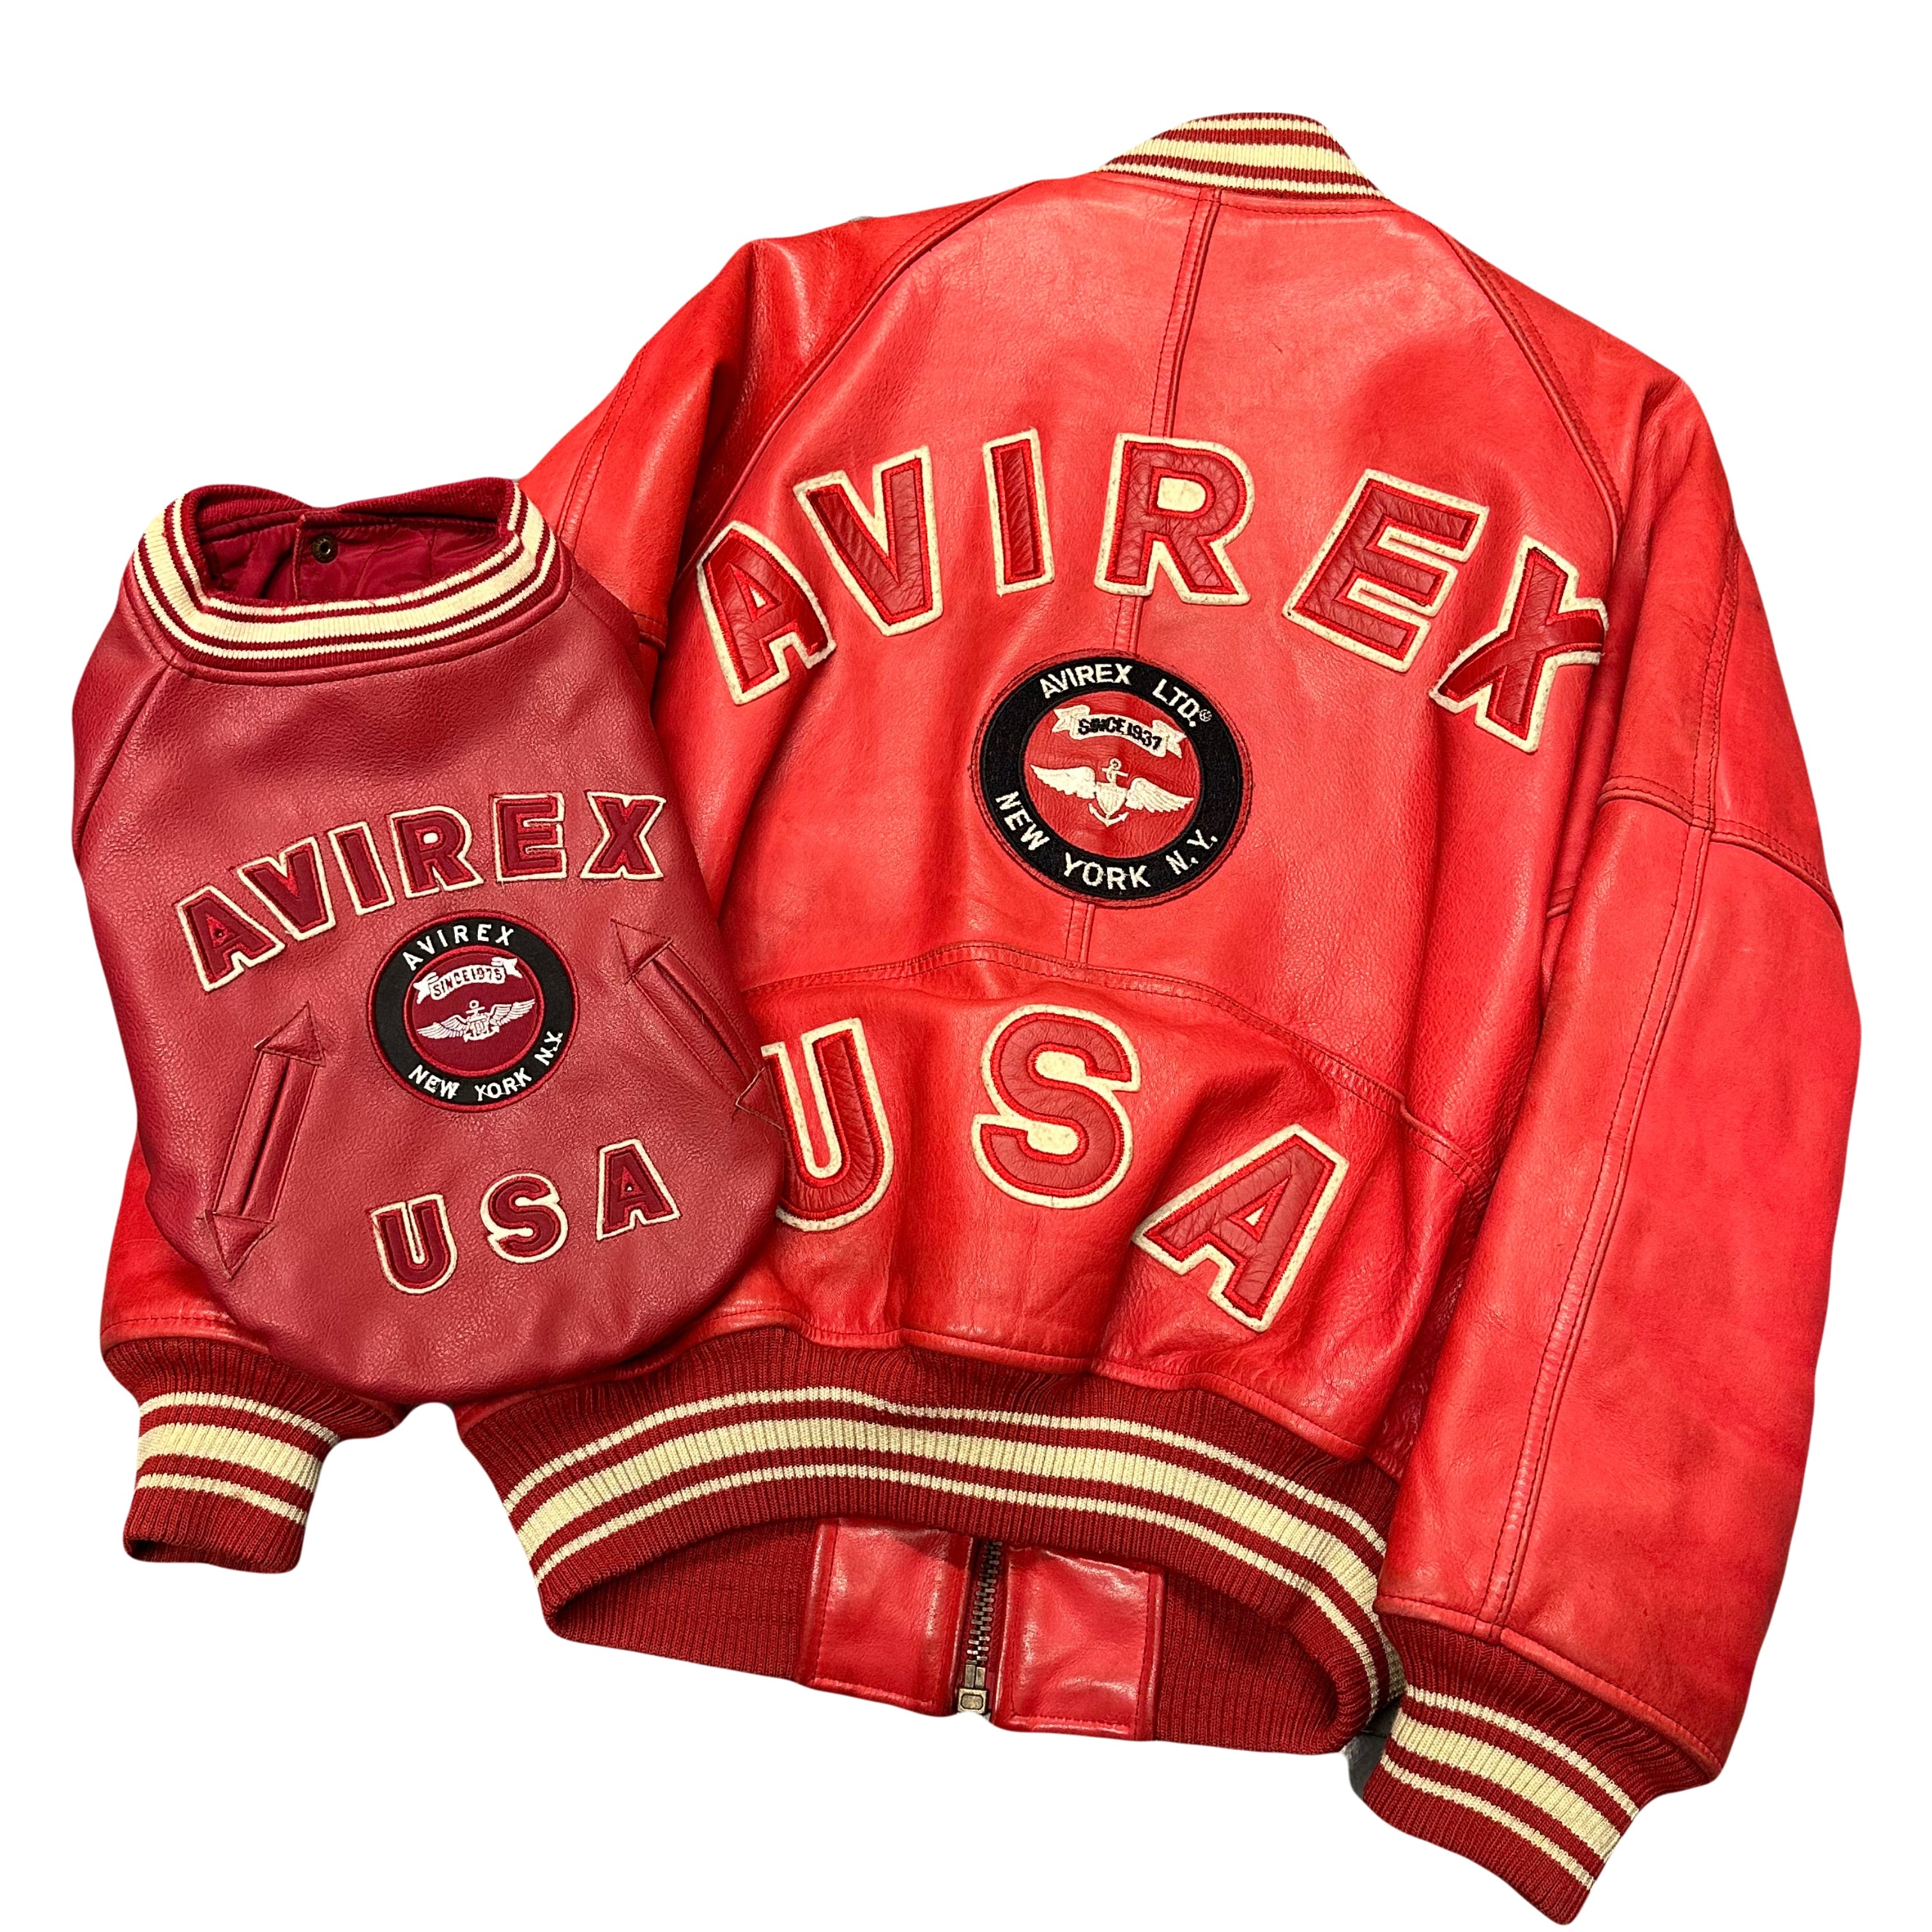 ARCHIVE Avirex USA Human & Dog Leather Jackets In Red